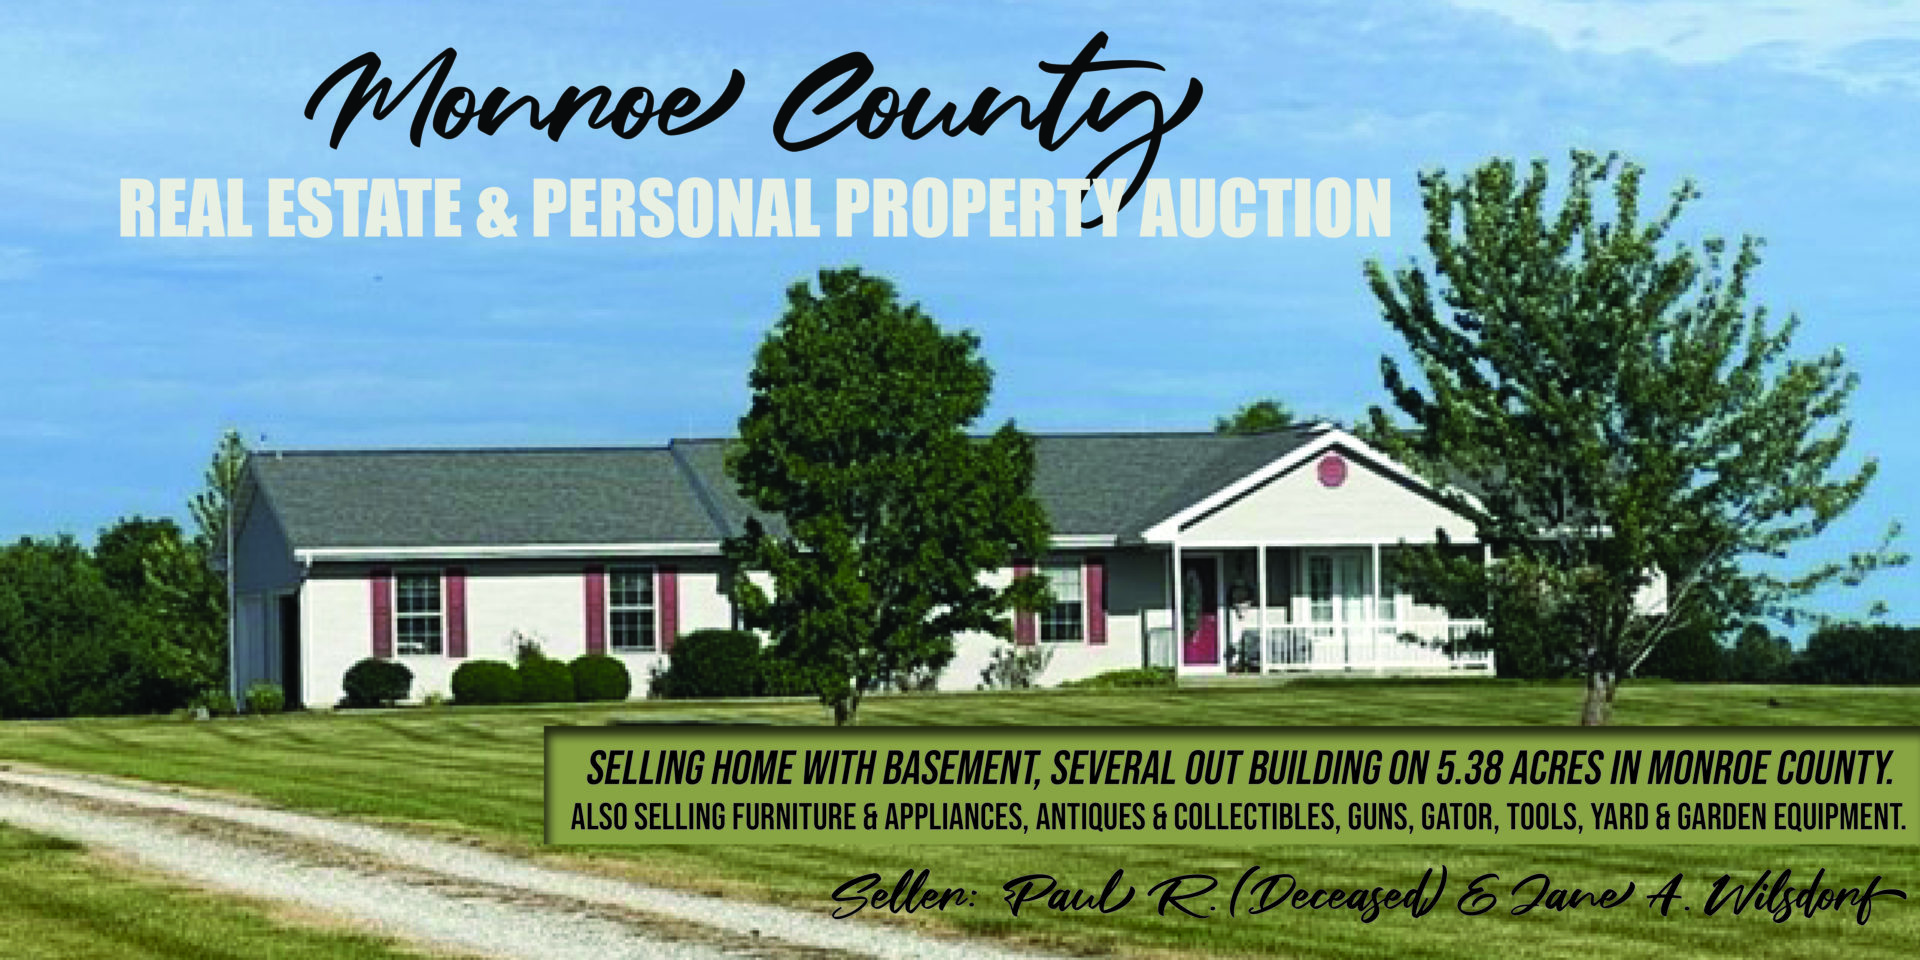 Monroe County Real Estate & Personal Property Auction